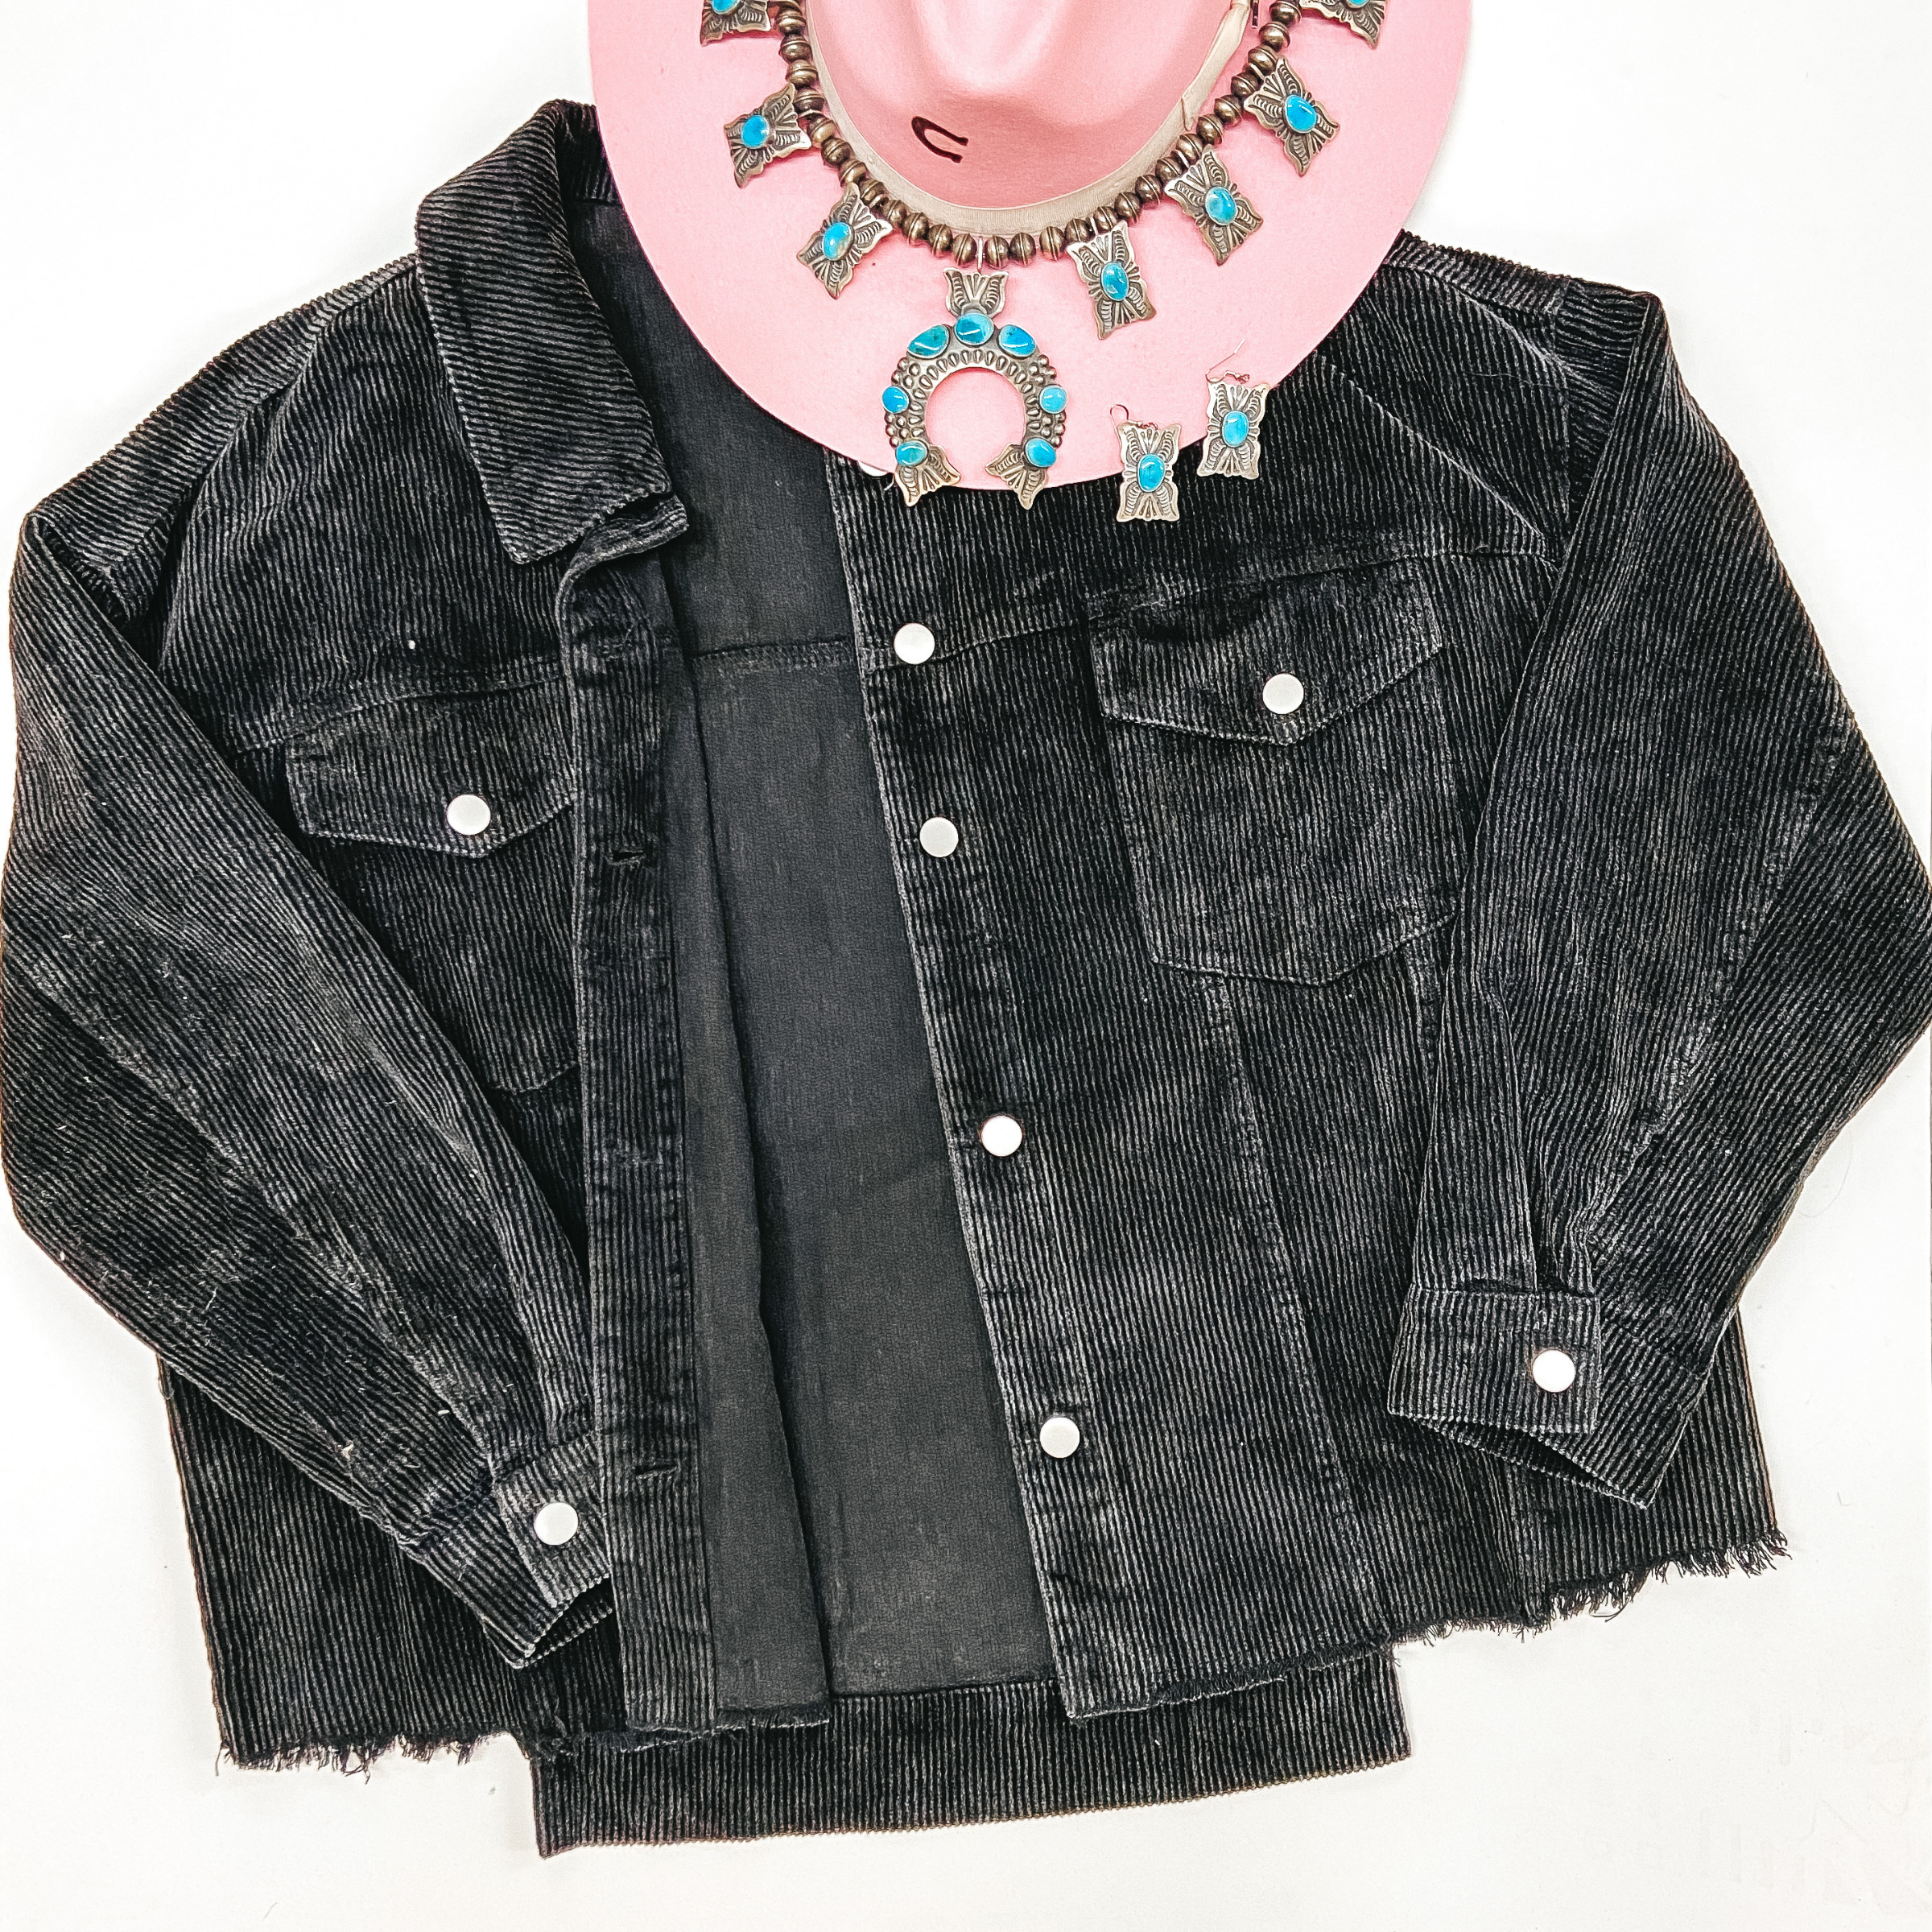 Edgy and Chic Button Up Corduroy Jacket with Raw Hem in Black - Giddy Up Glamour Boutique